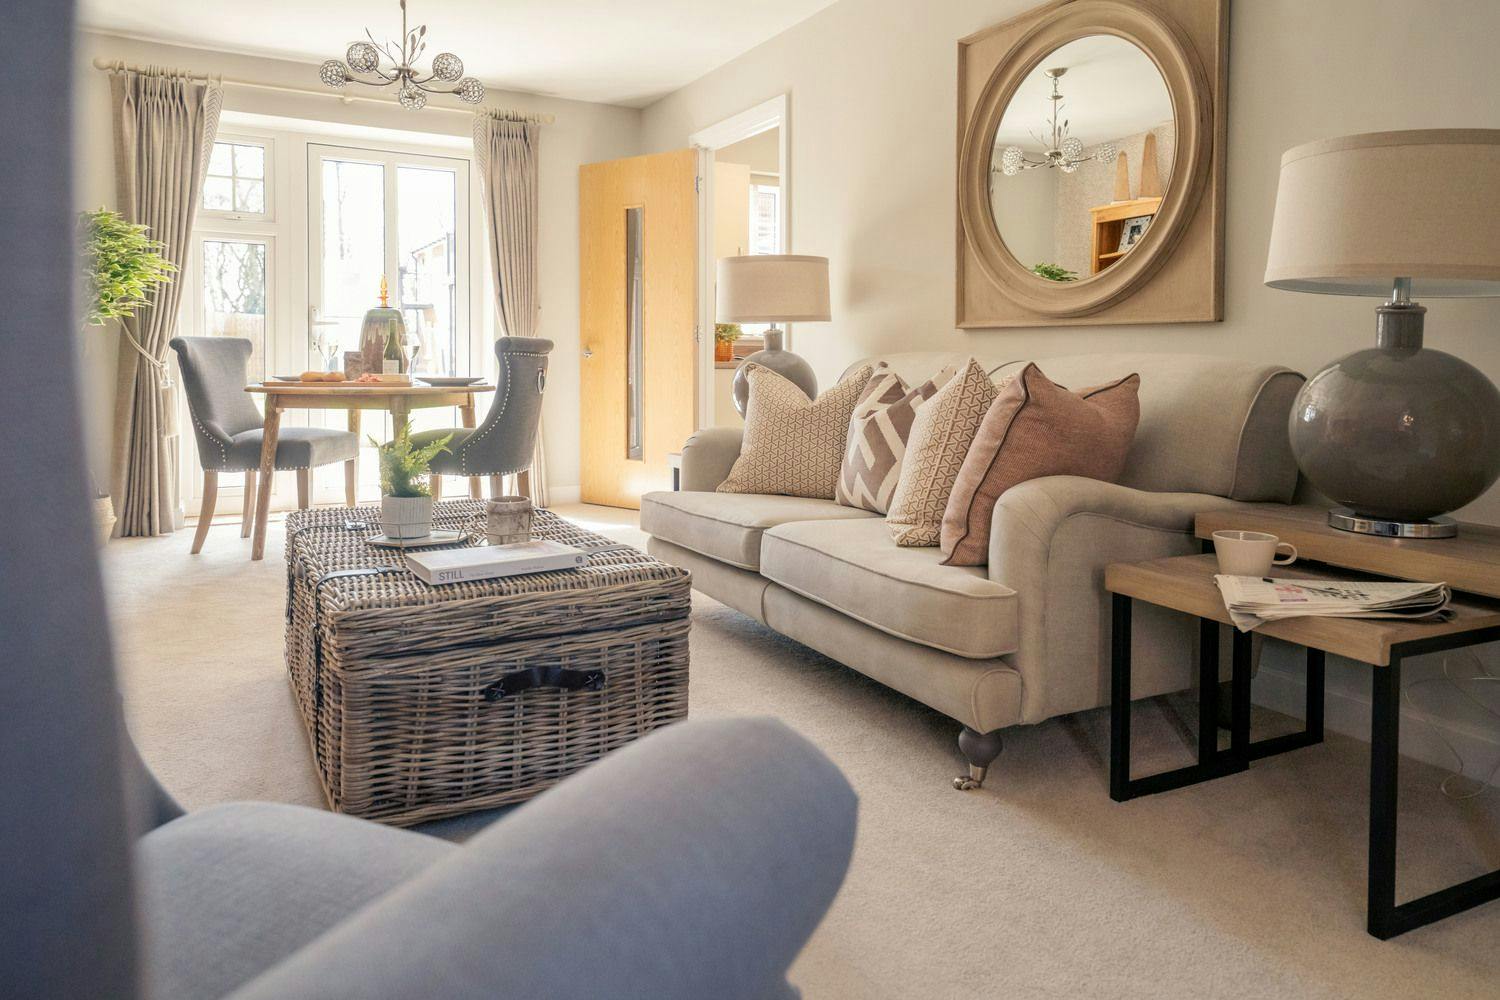 Living Room at The Clockhouse Retirement Development in Guildford, Surrey